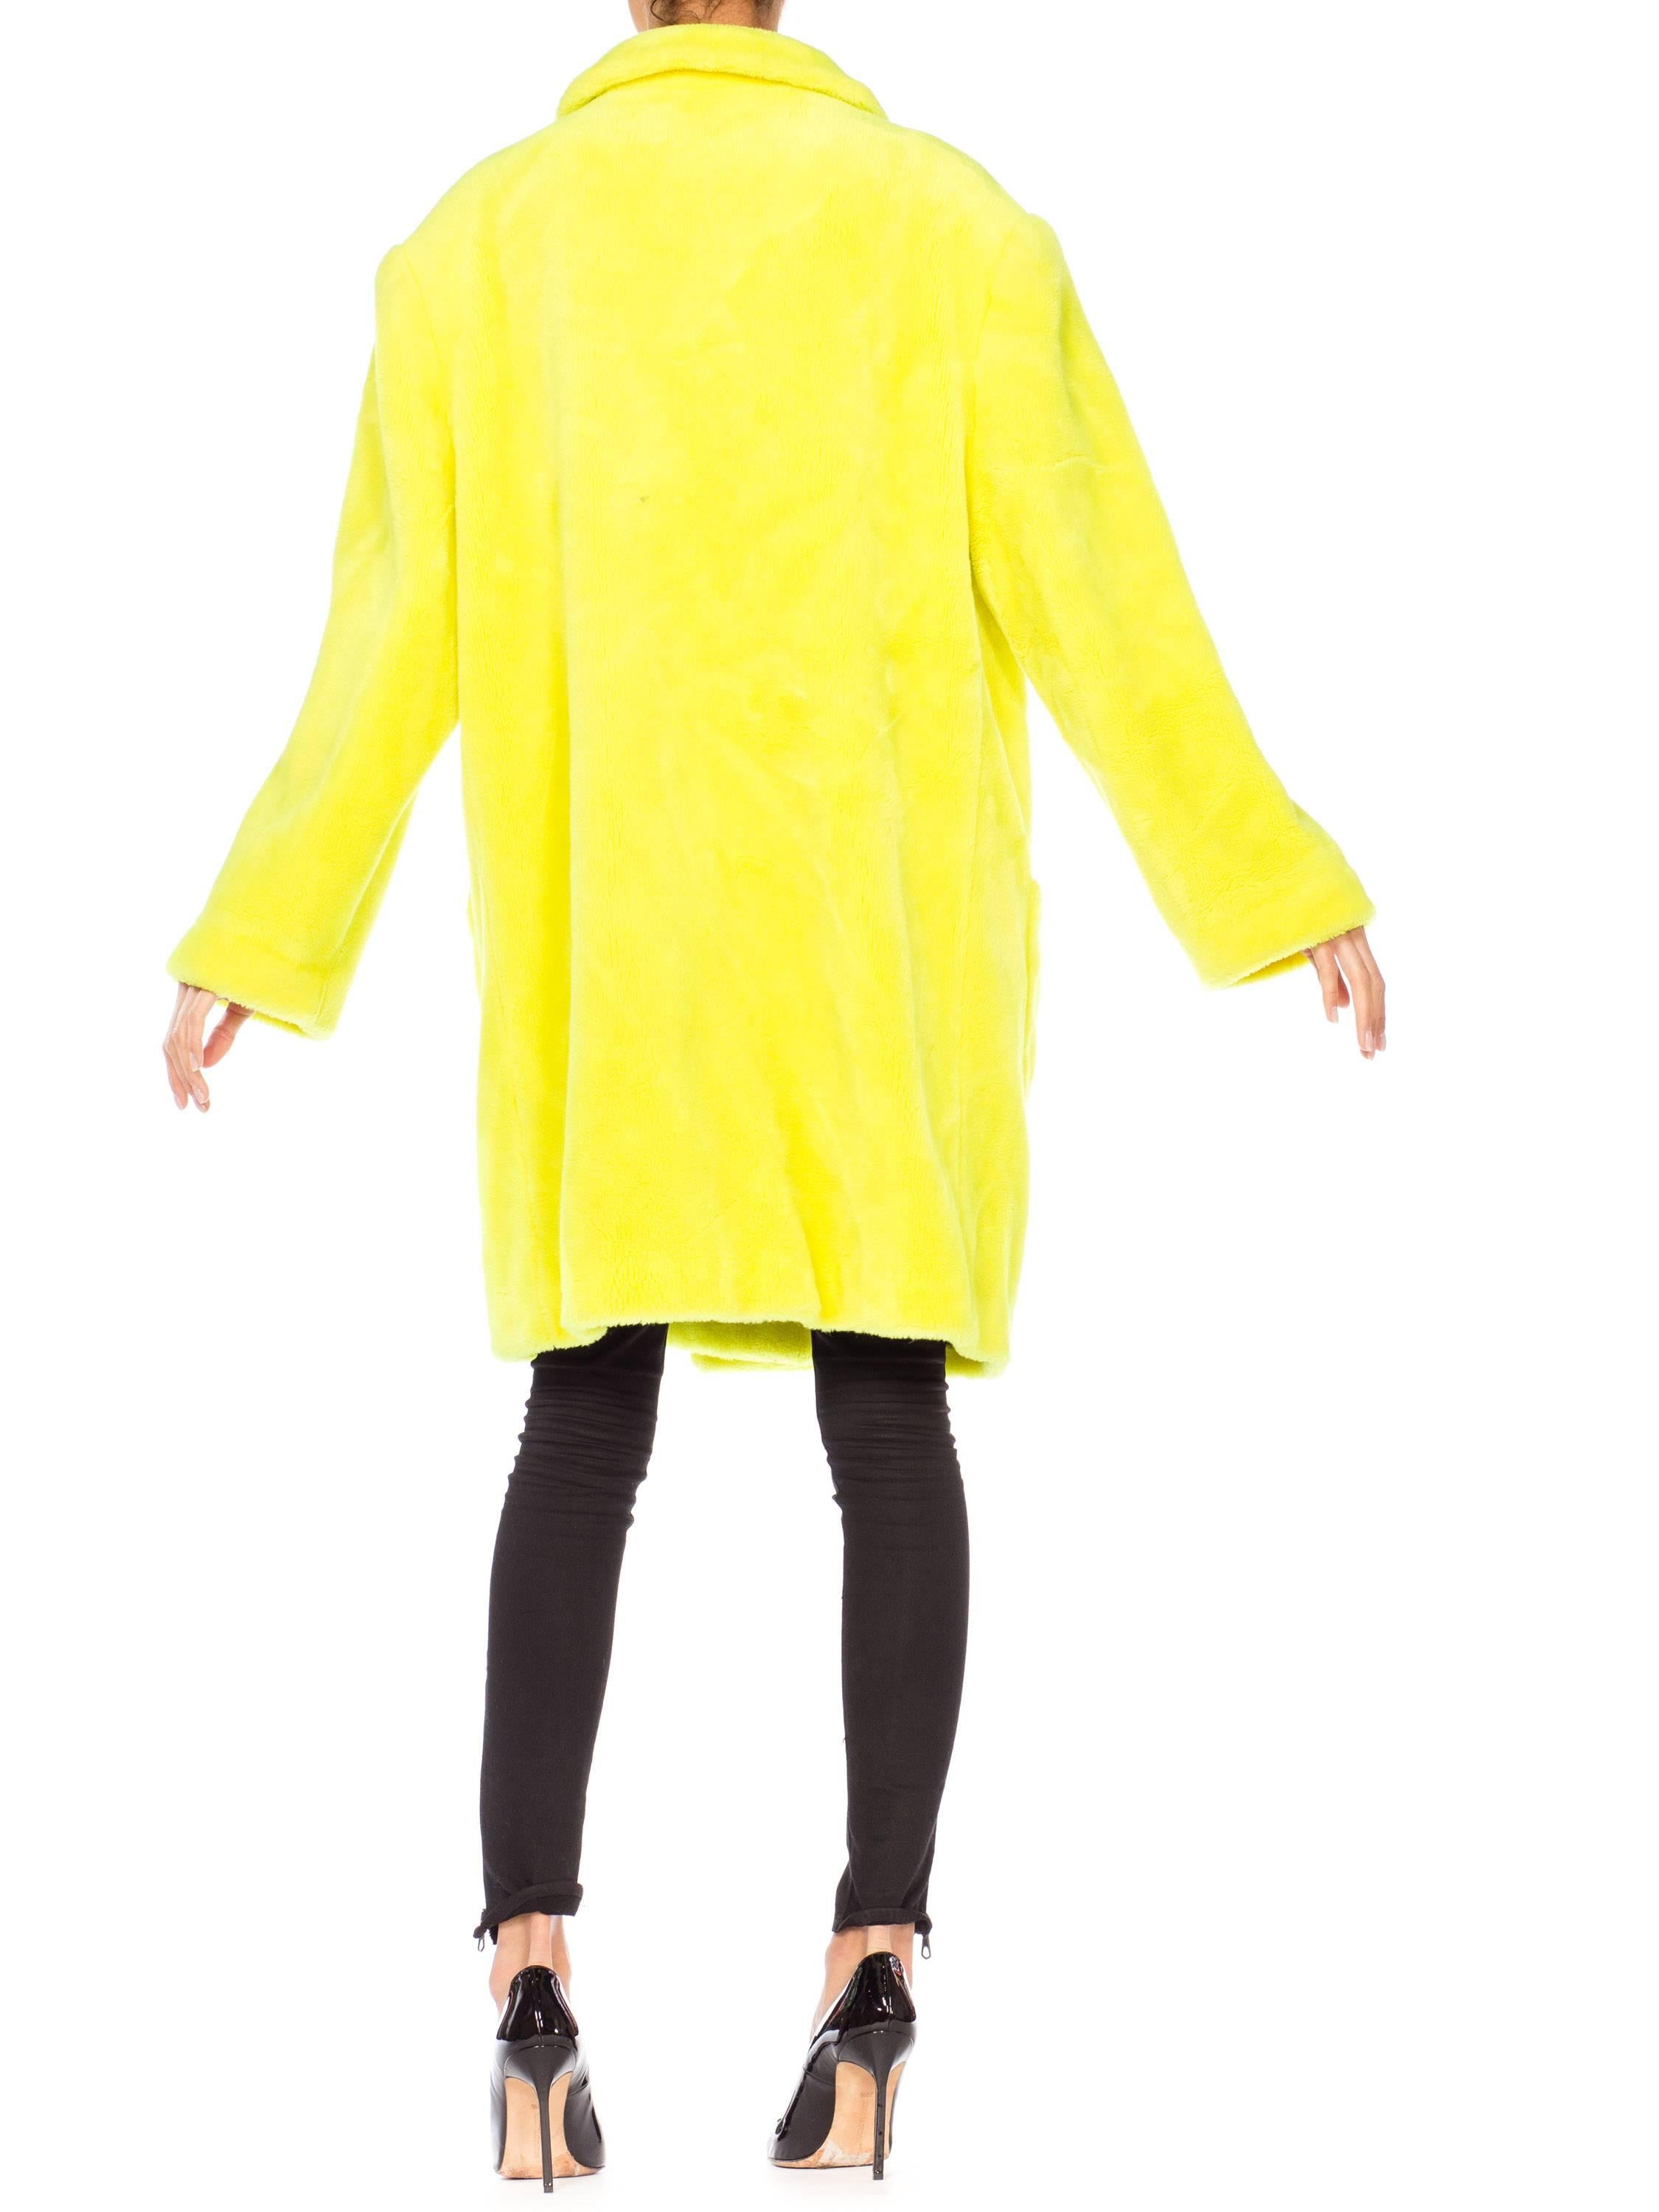 Stephen Sprouse Oversized Highlighter Yellow Faux Fur Coat, 1980s  5